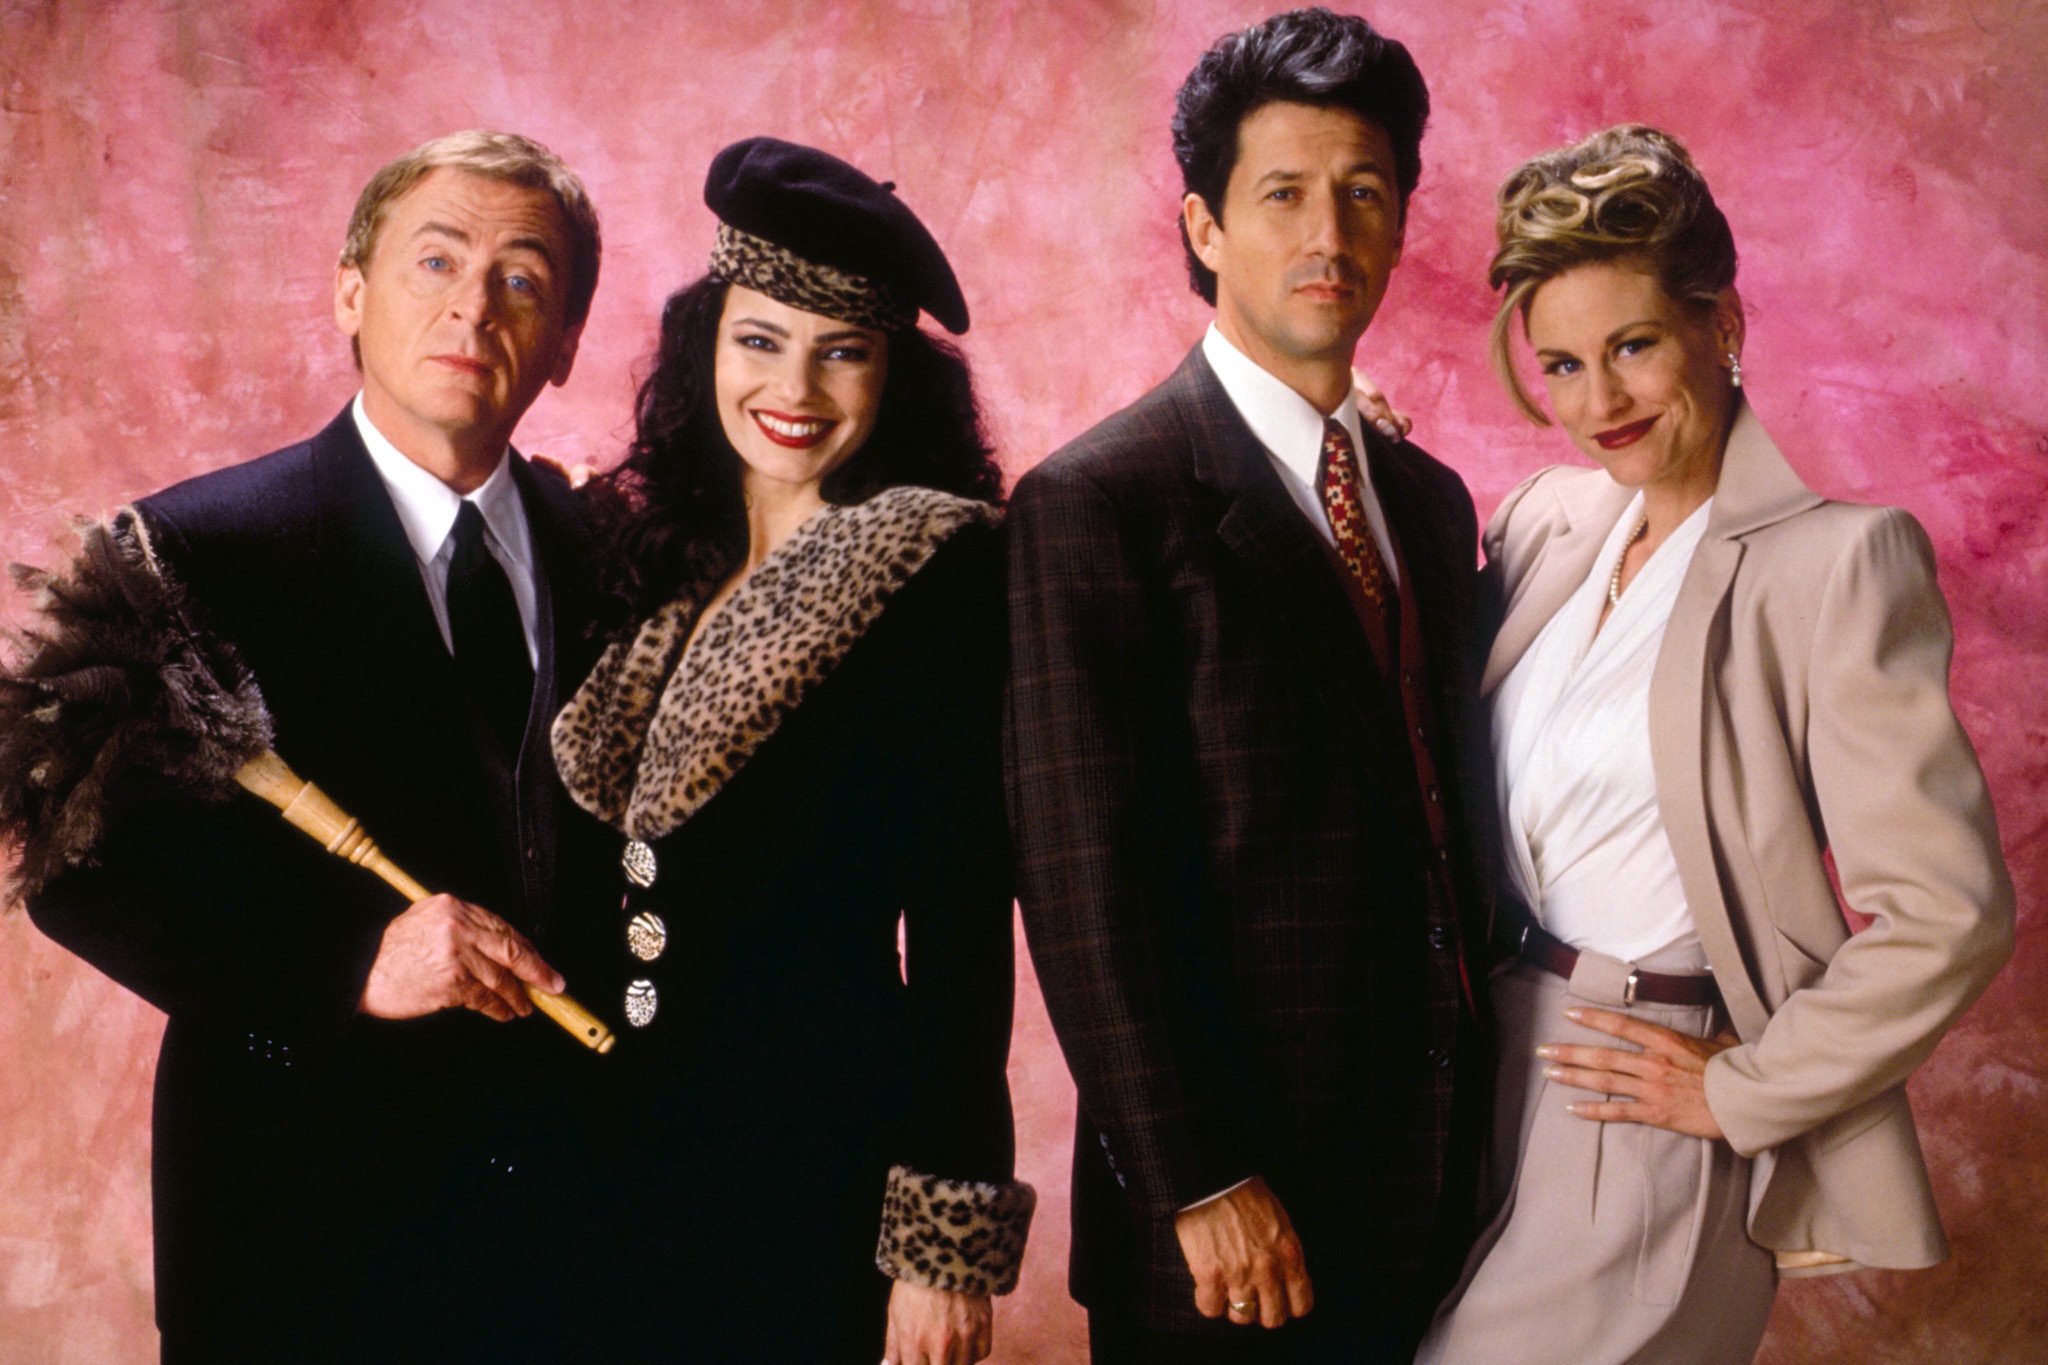 Daniel Davis, Fran Drescher, Charlese Shaughnessy and Lauren Lane pose for a promotional photo for 'The Nanny'